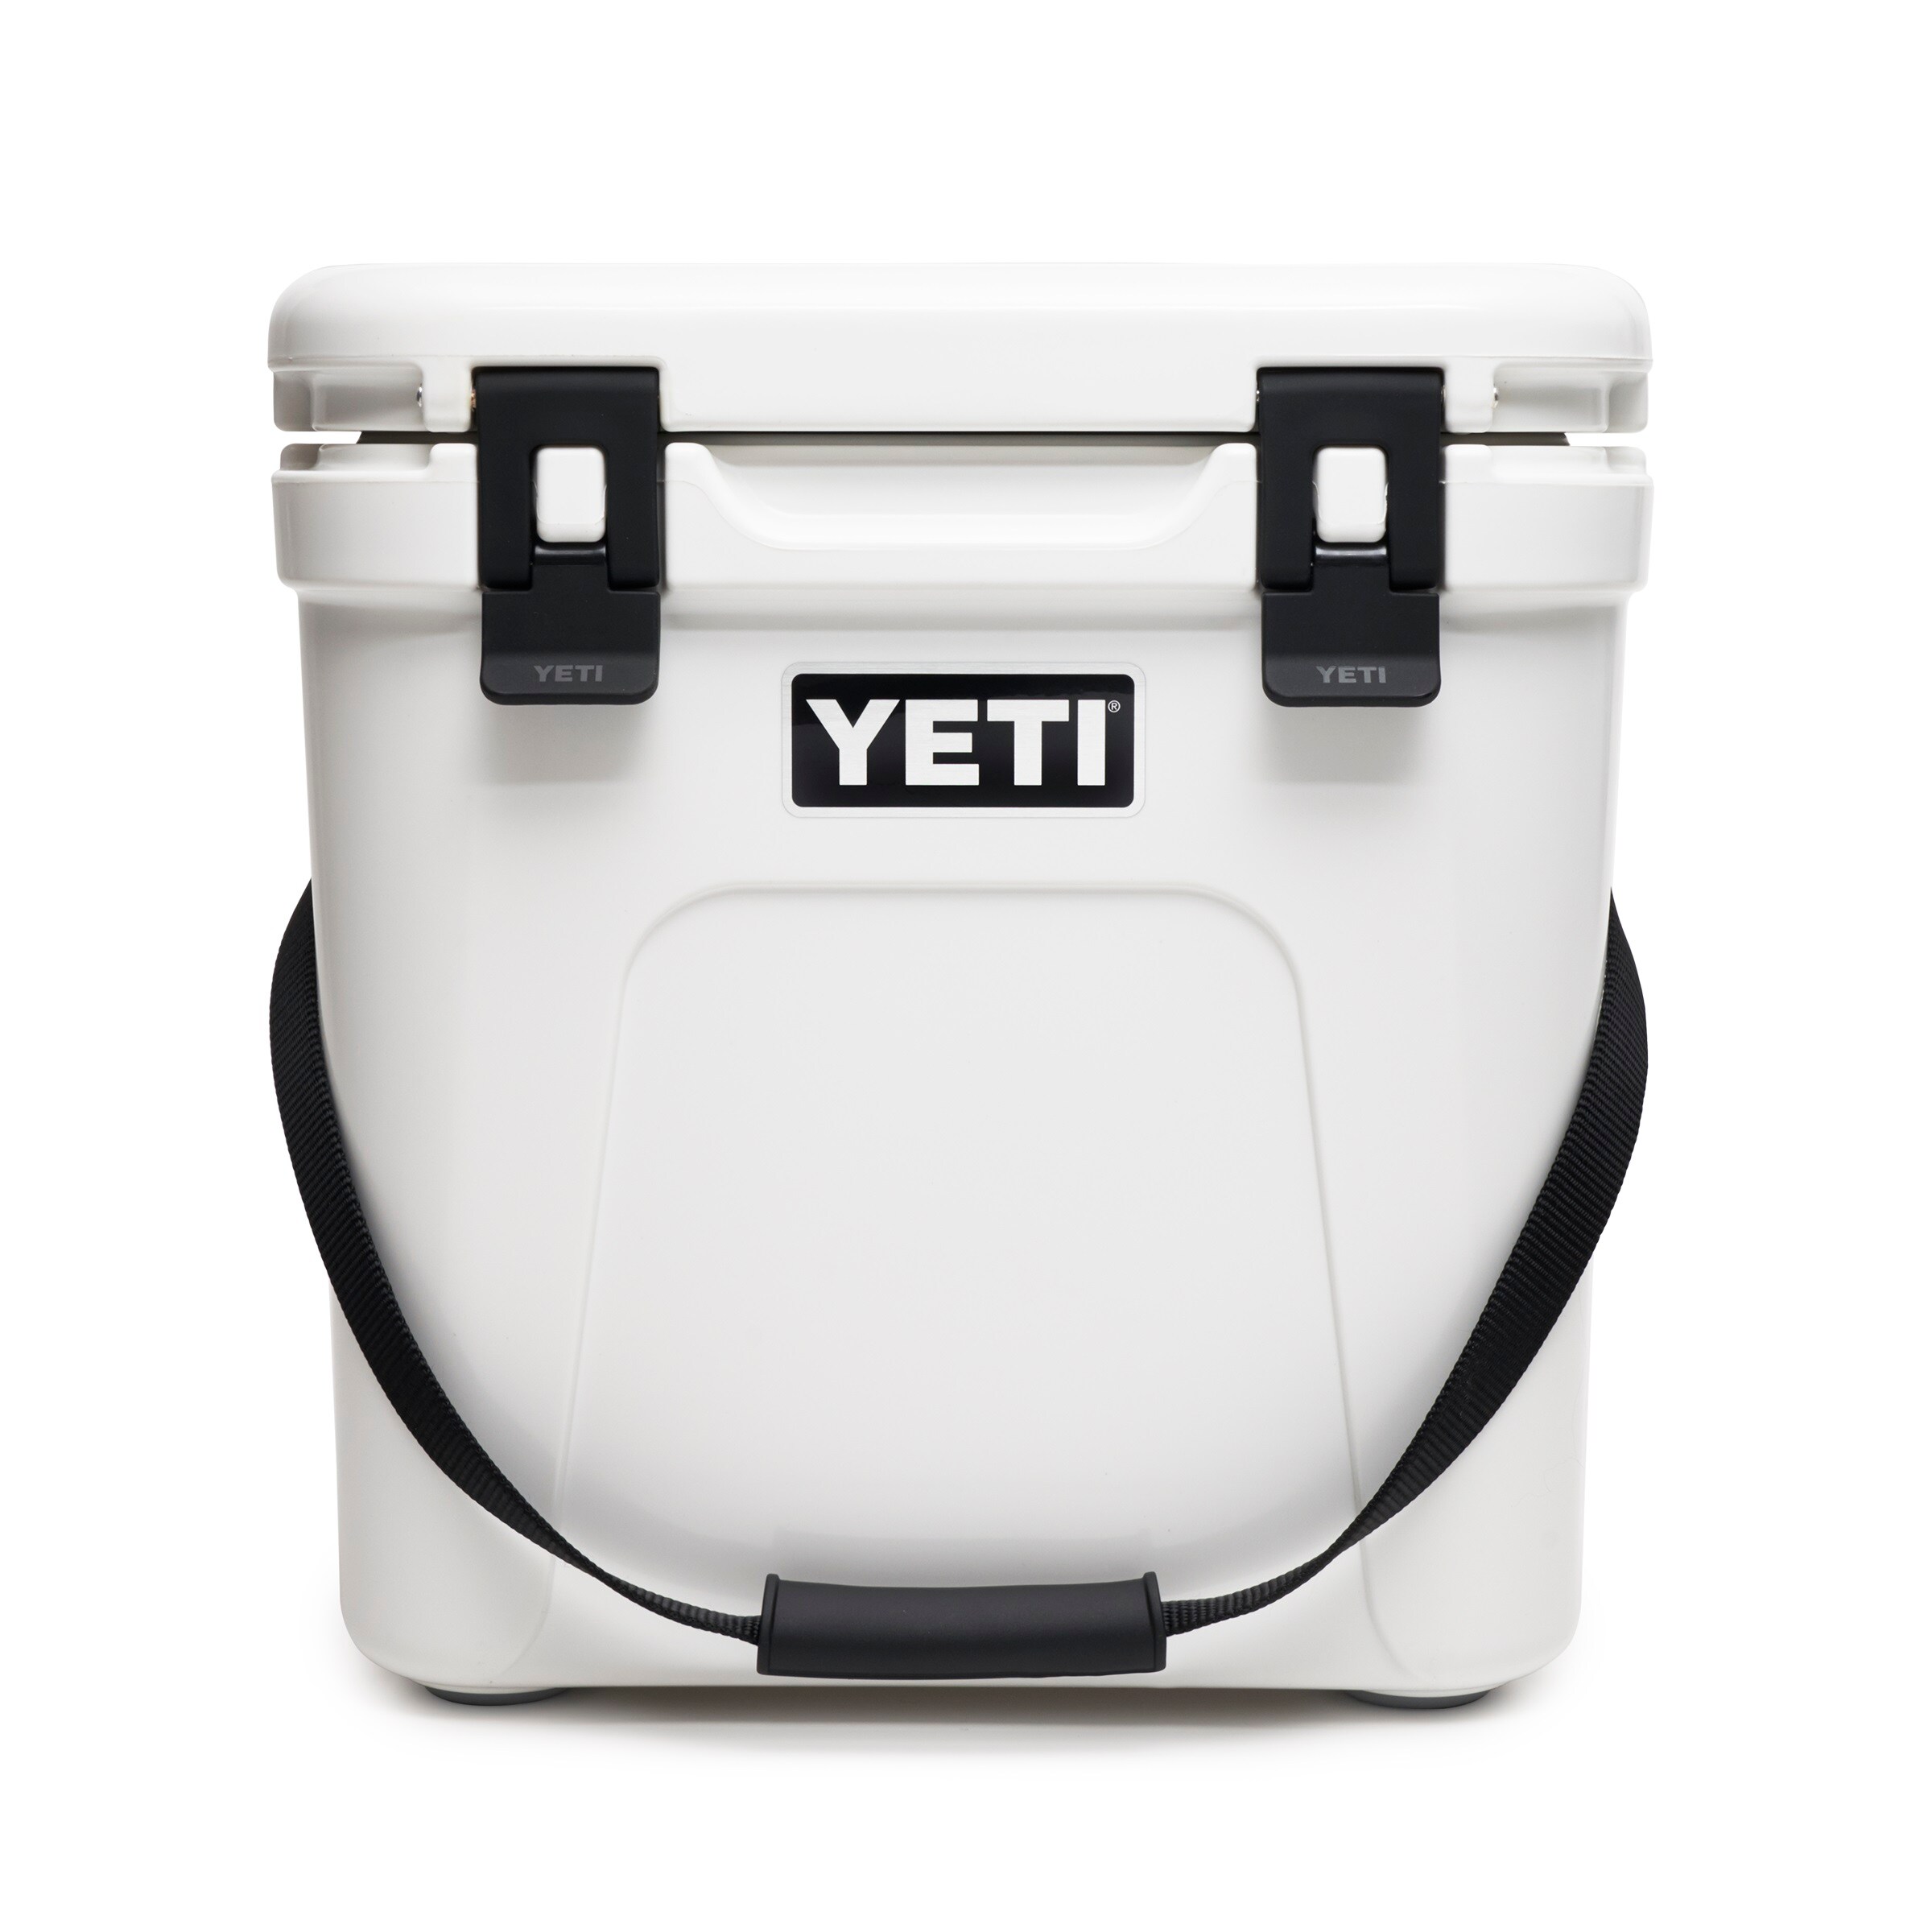 YETI Roadie 24 Insulated Chest Cooler, White at Lowes.com